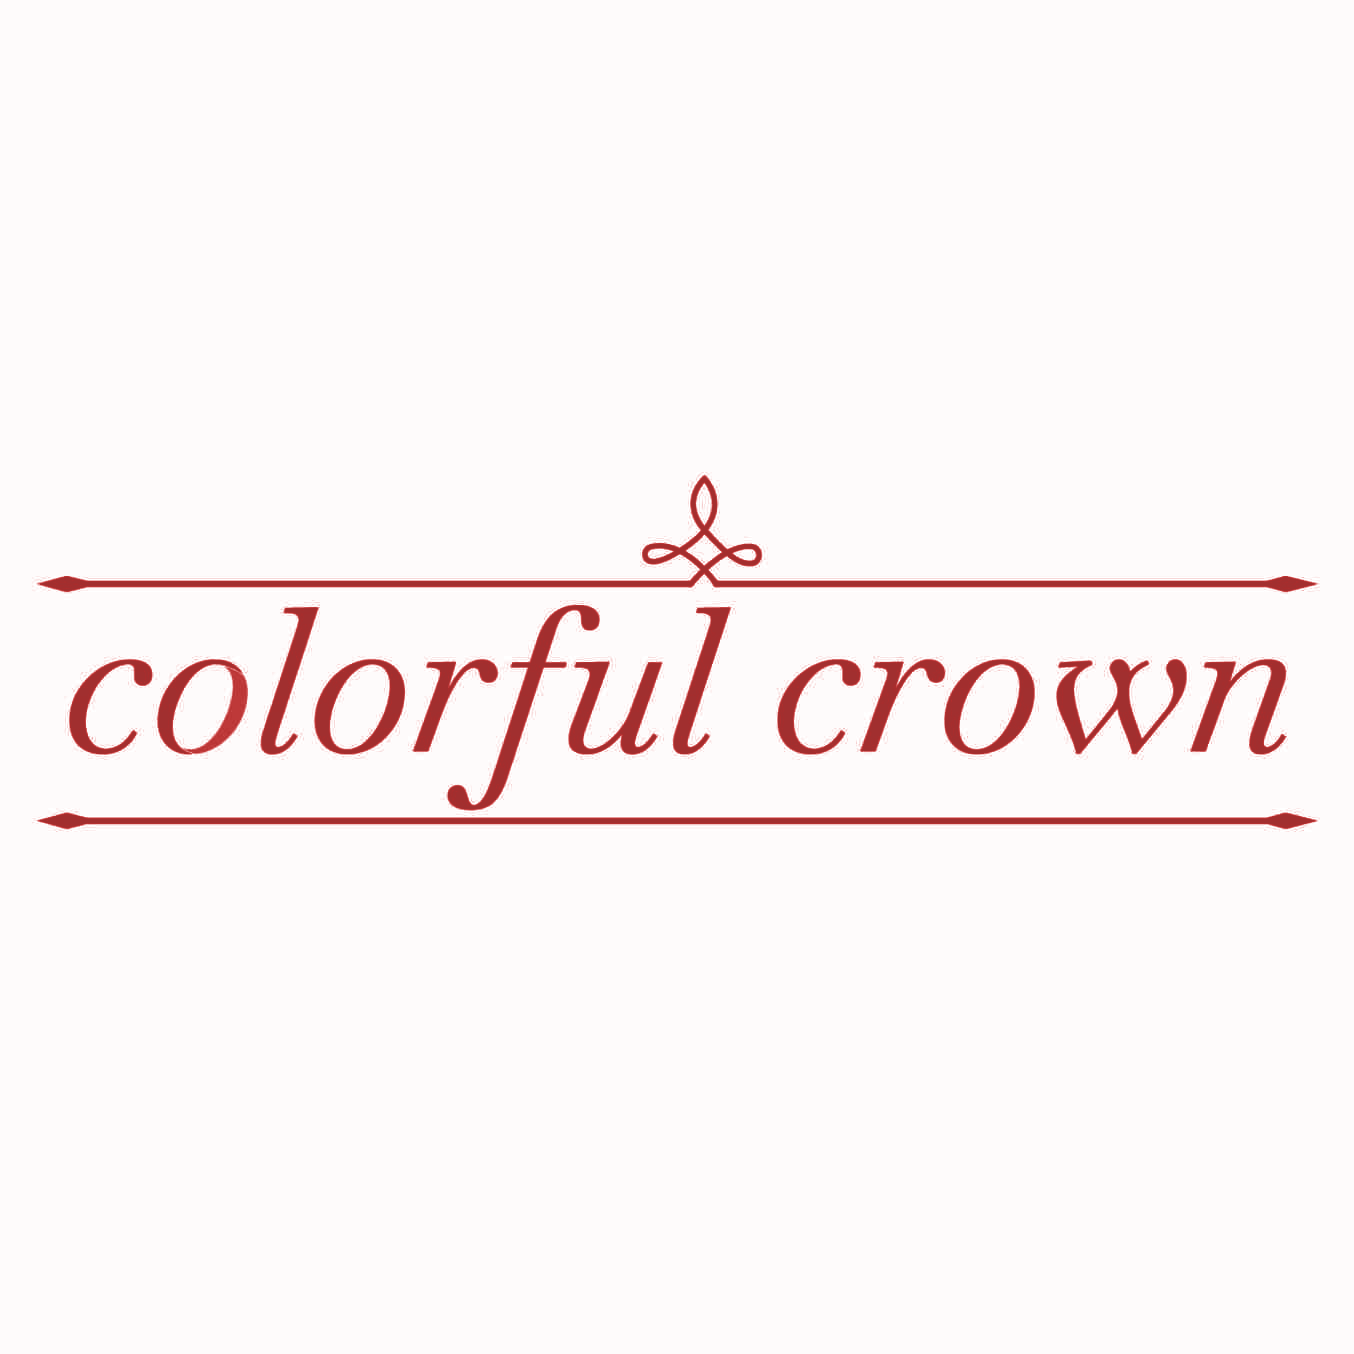 COLORFUL CROWN